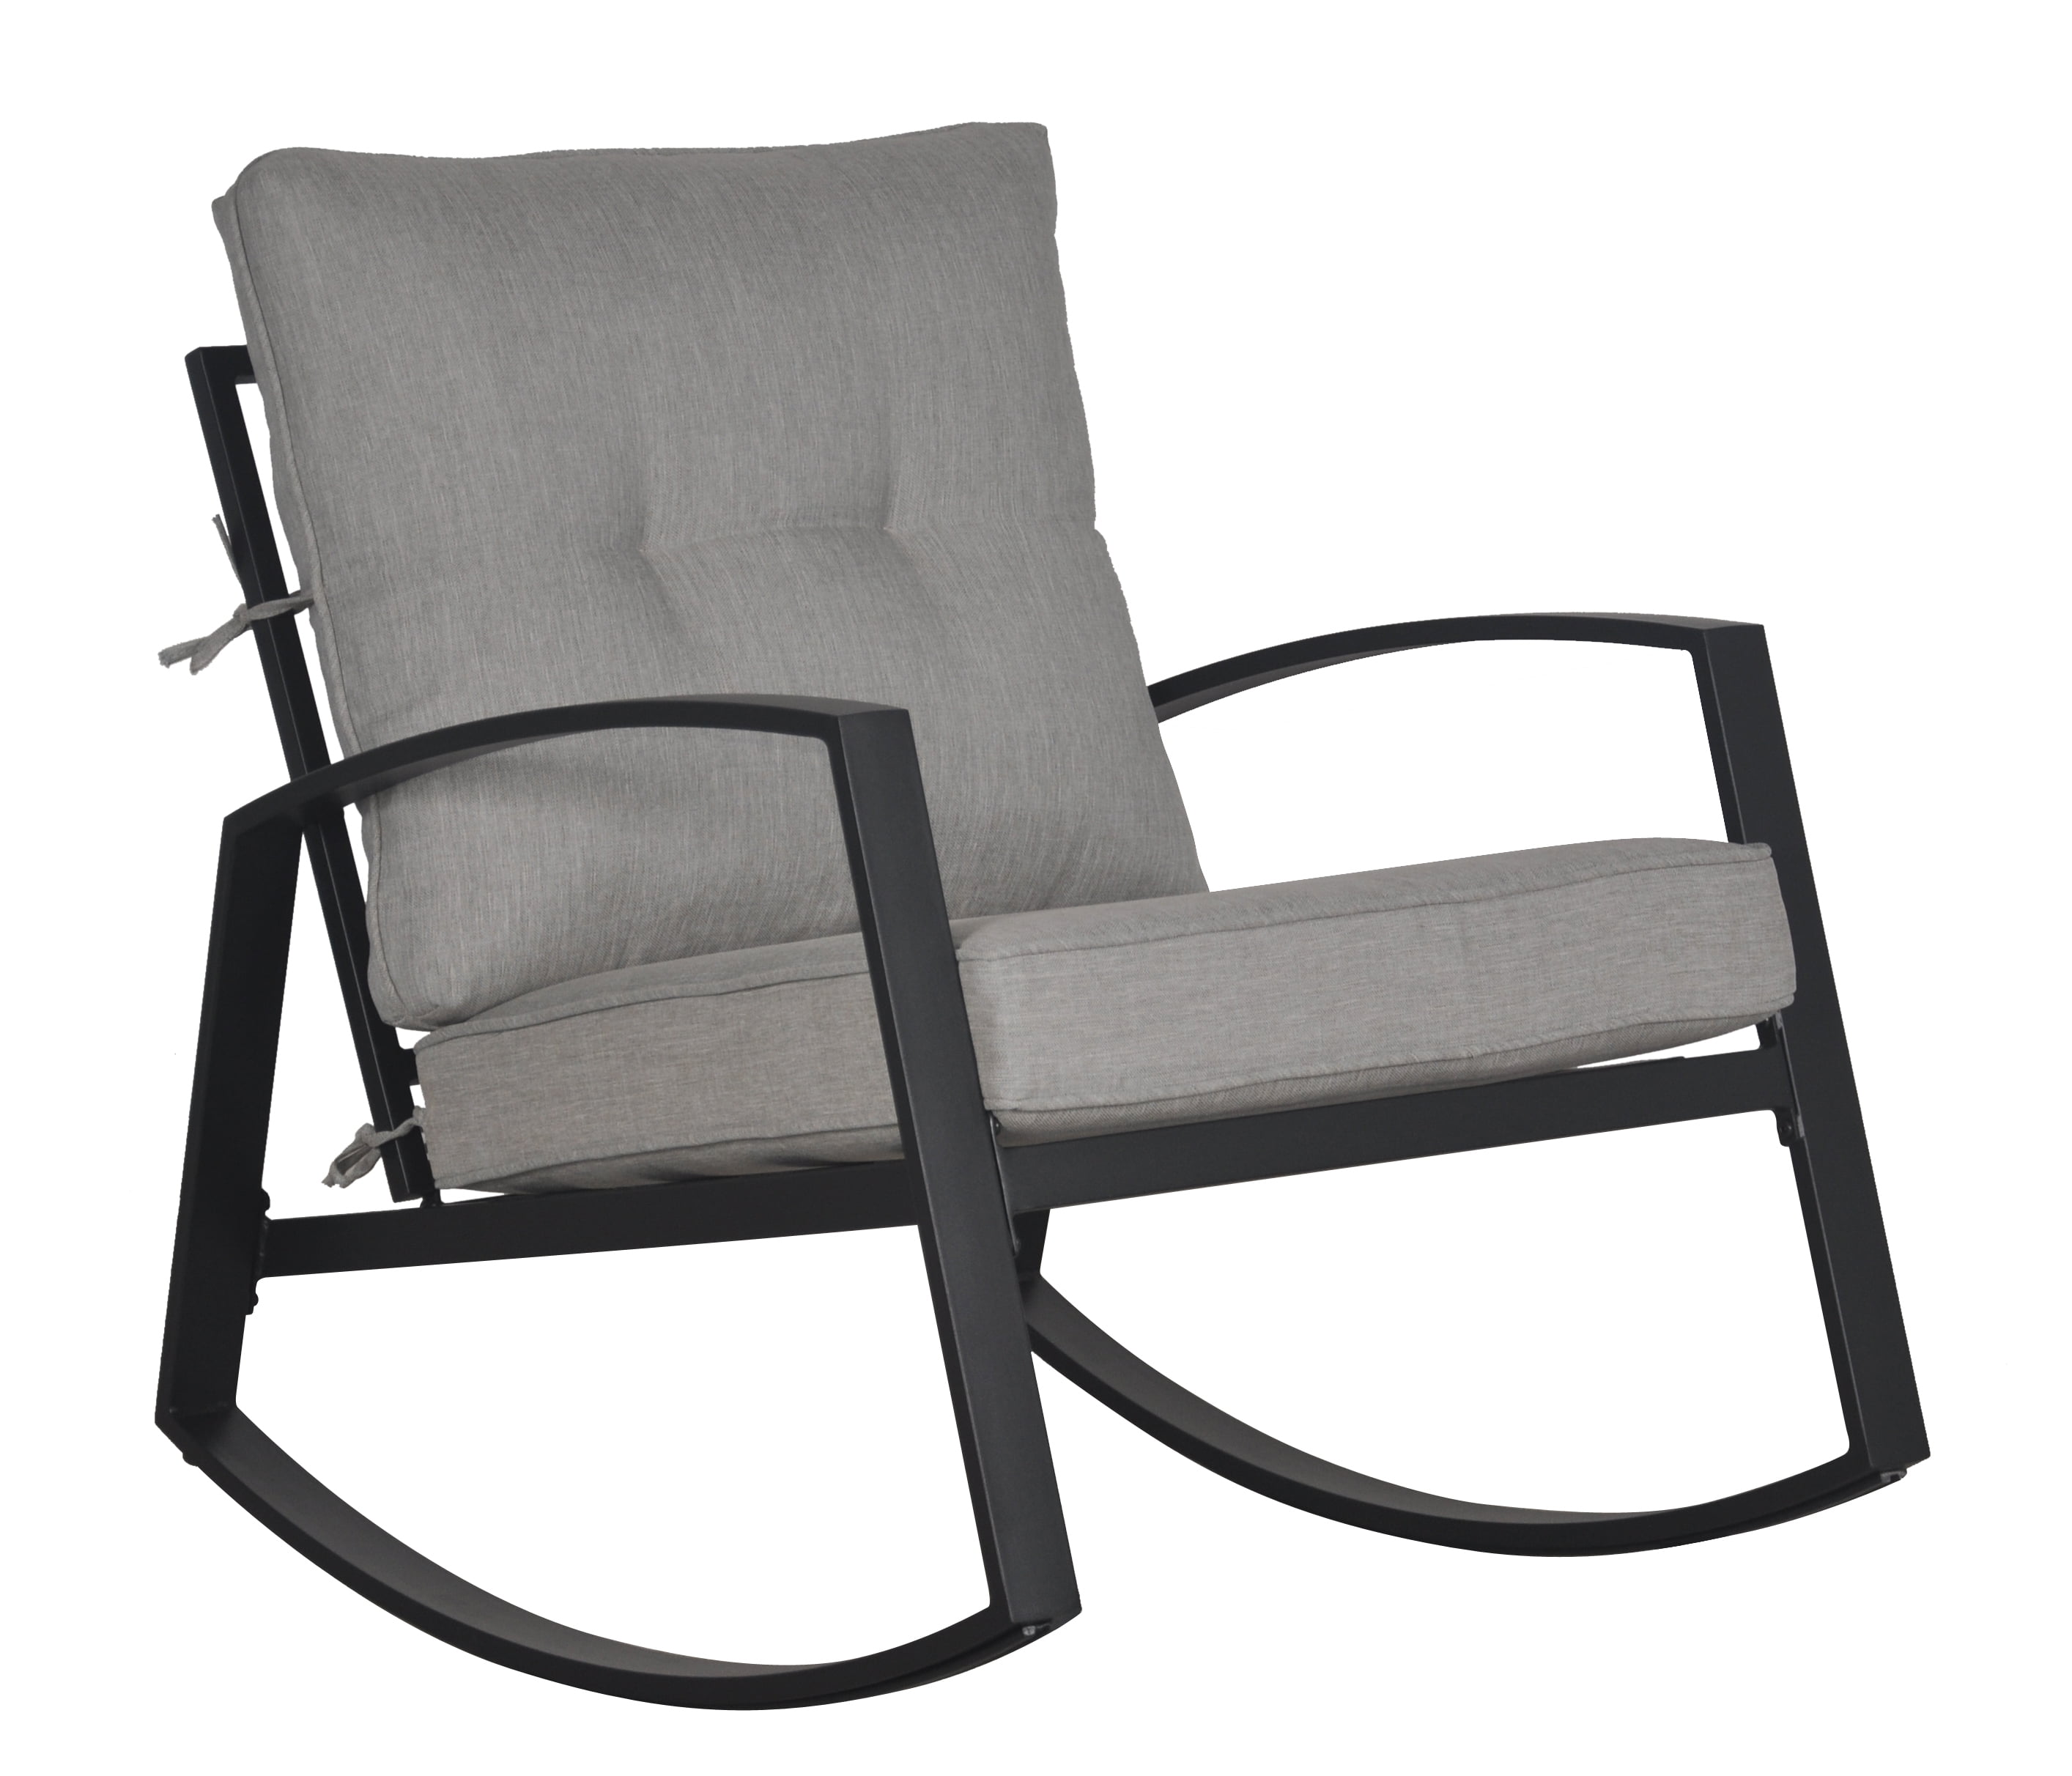 mainstays asher springs 2piece steel cushioned rocking chair set grey